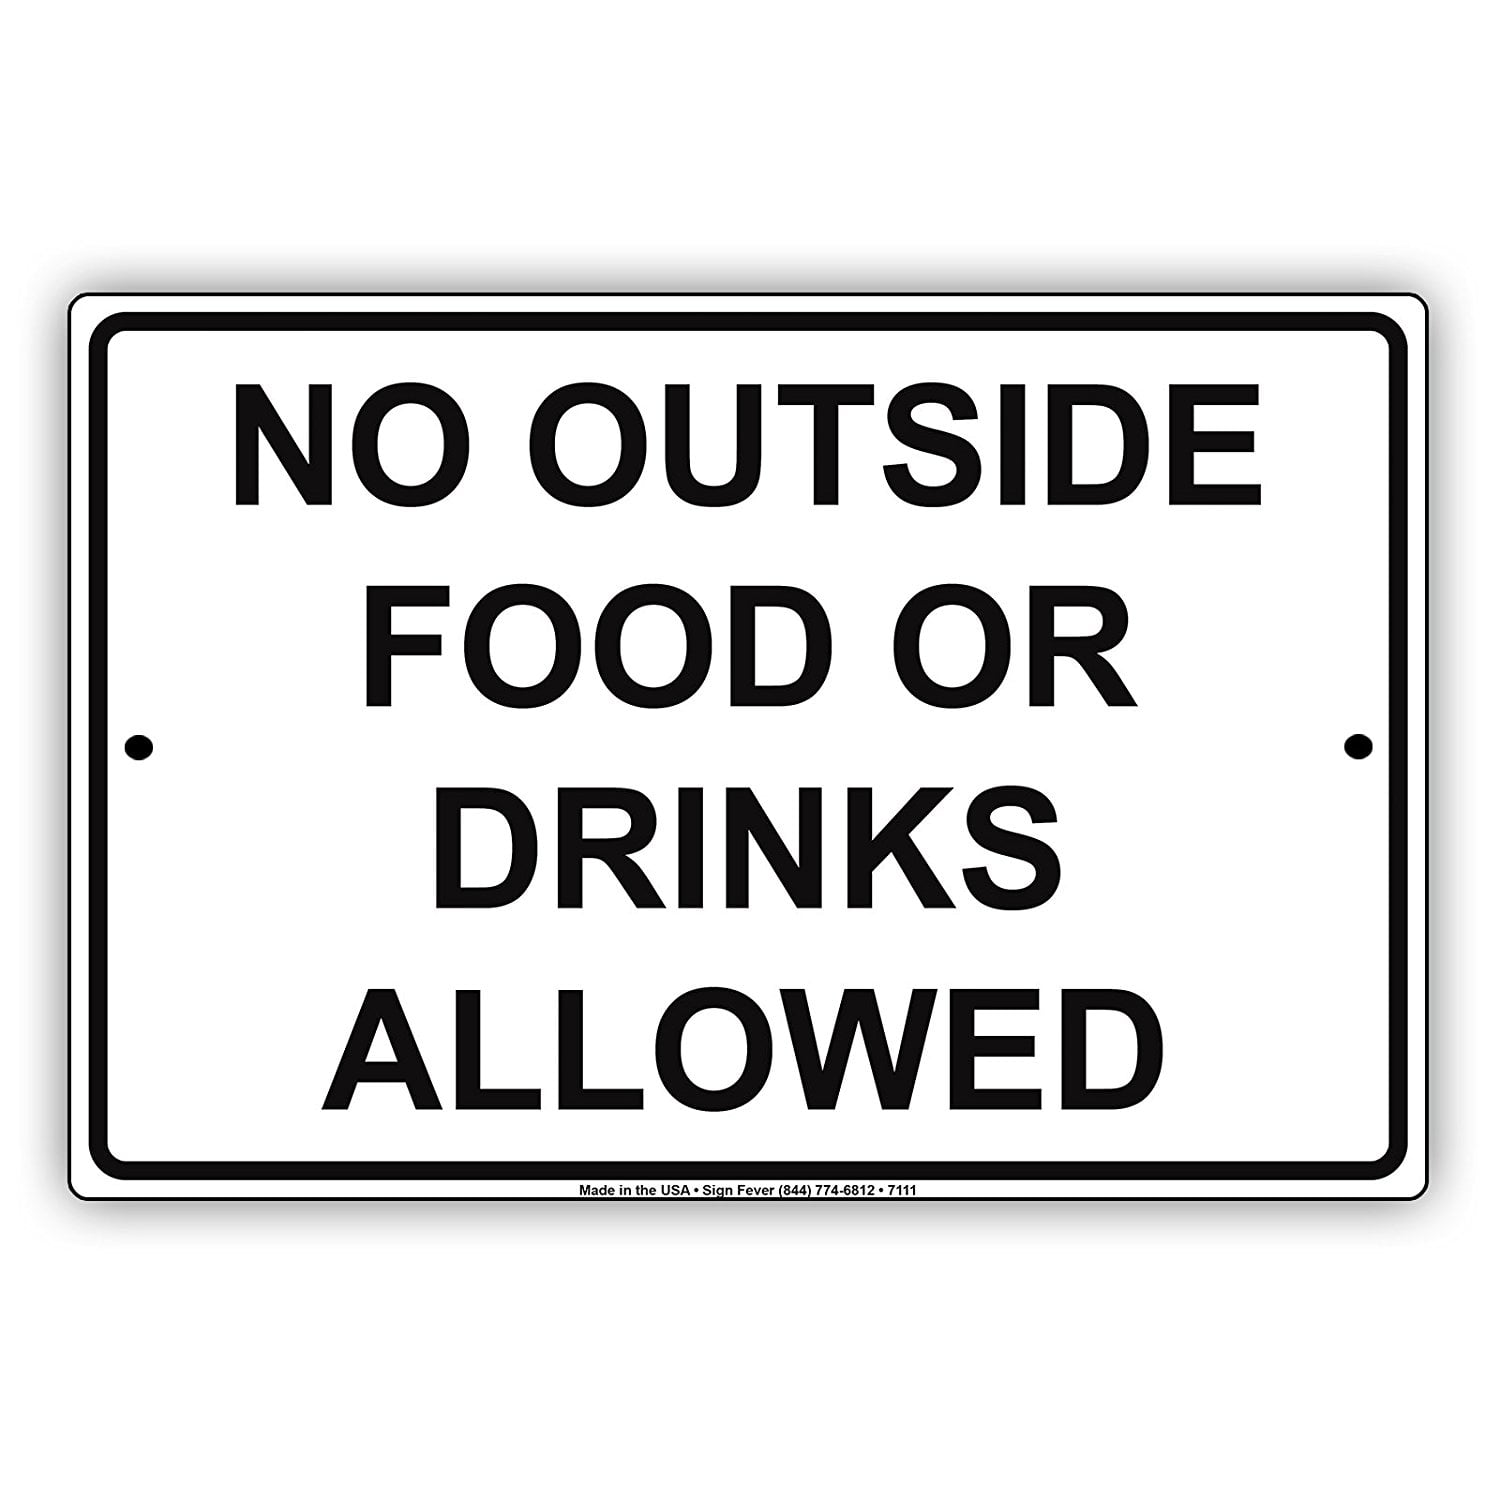 Not allowed speed. Food sign. Знак аутсайда. Not allowed. Outdoor shop Metal sign.